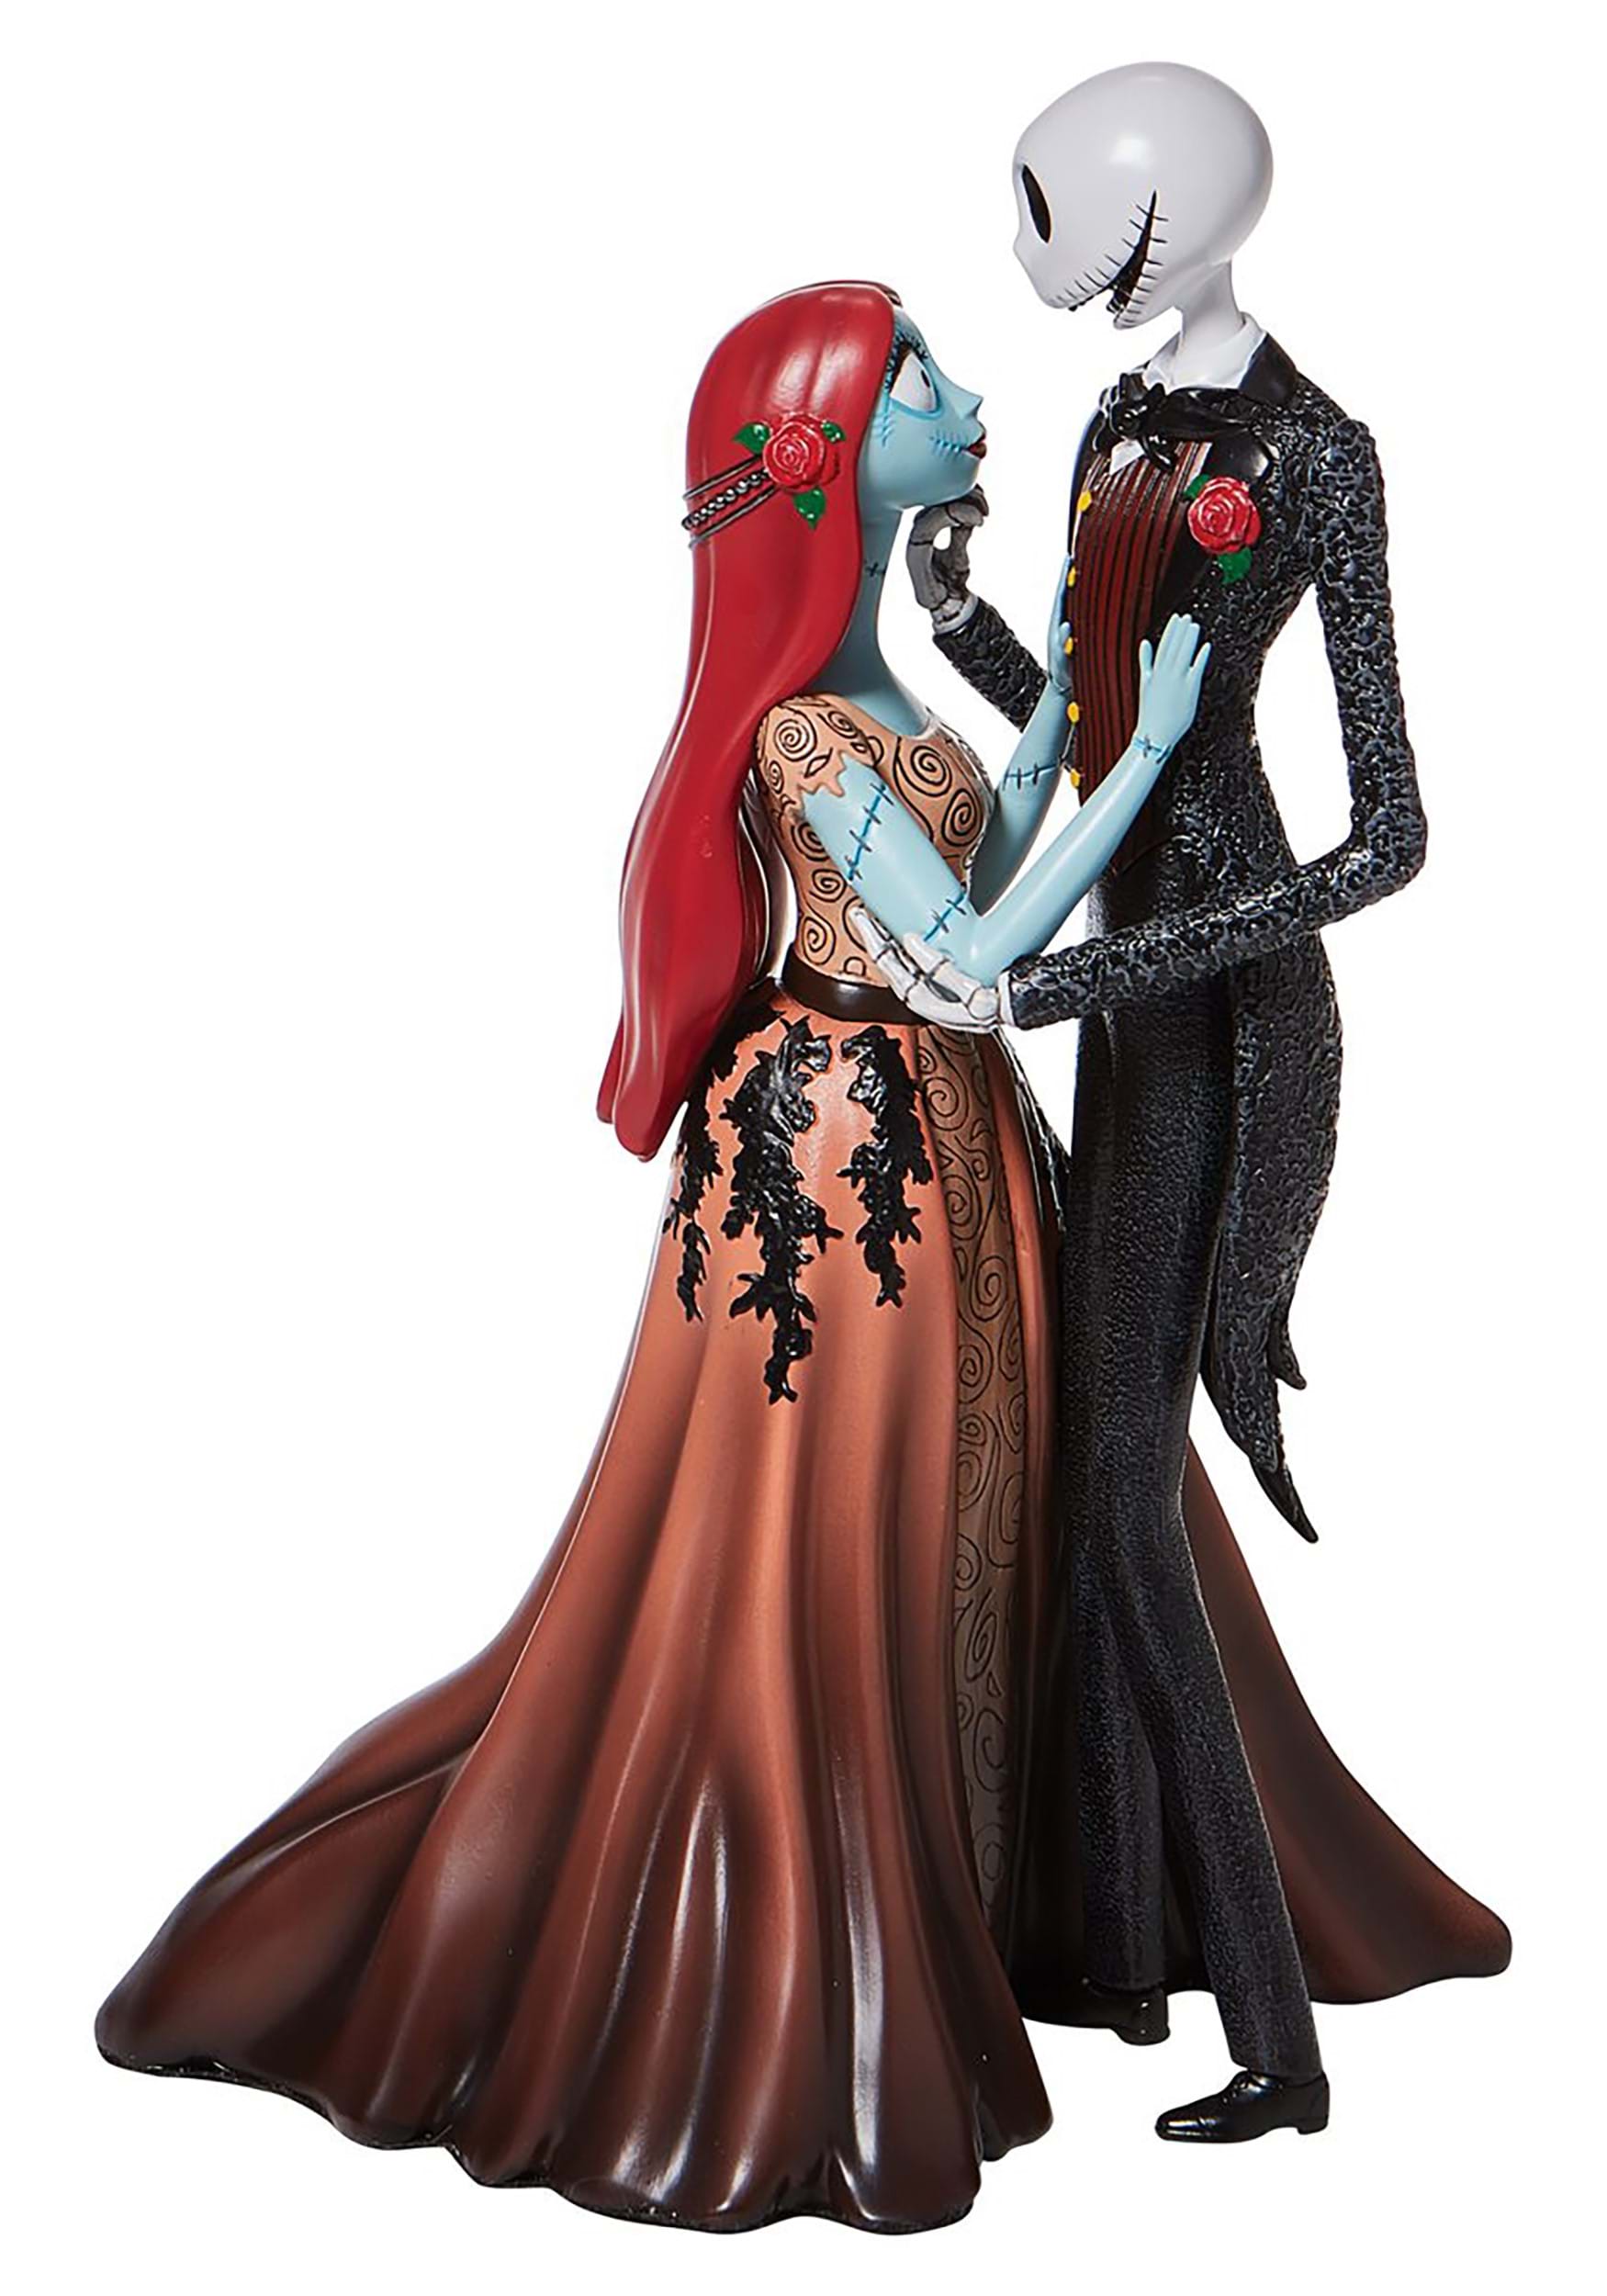 Jack & Sally Nightmare Before Christmas Couture de Force Statue